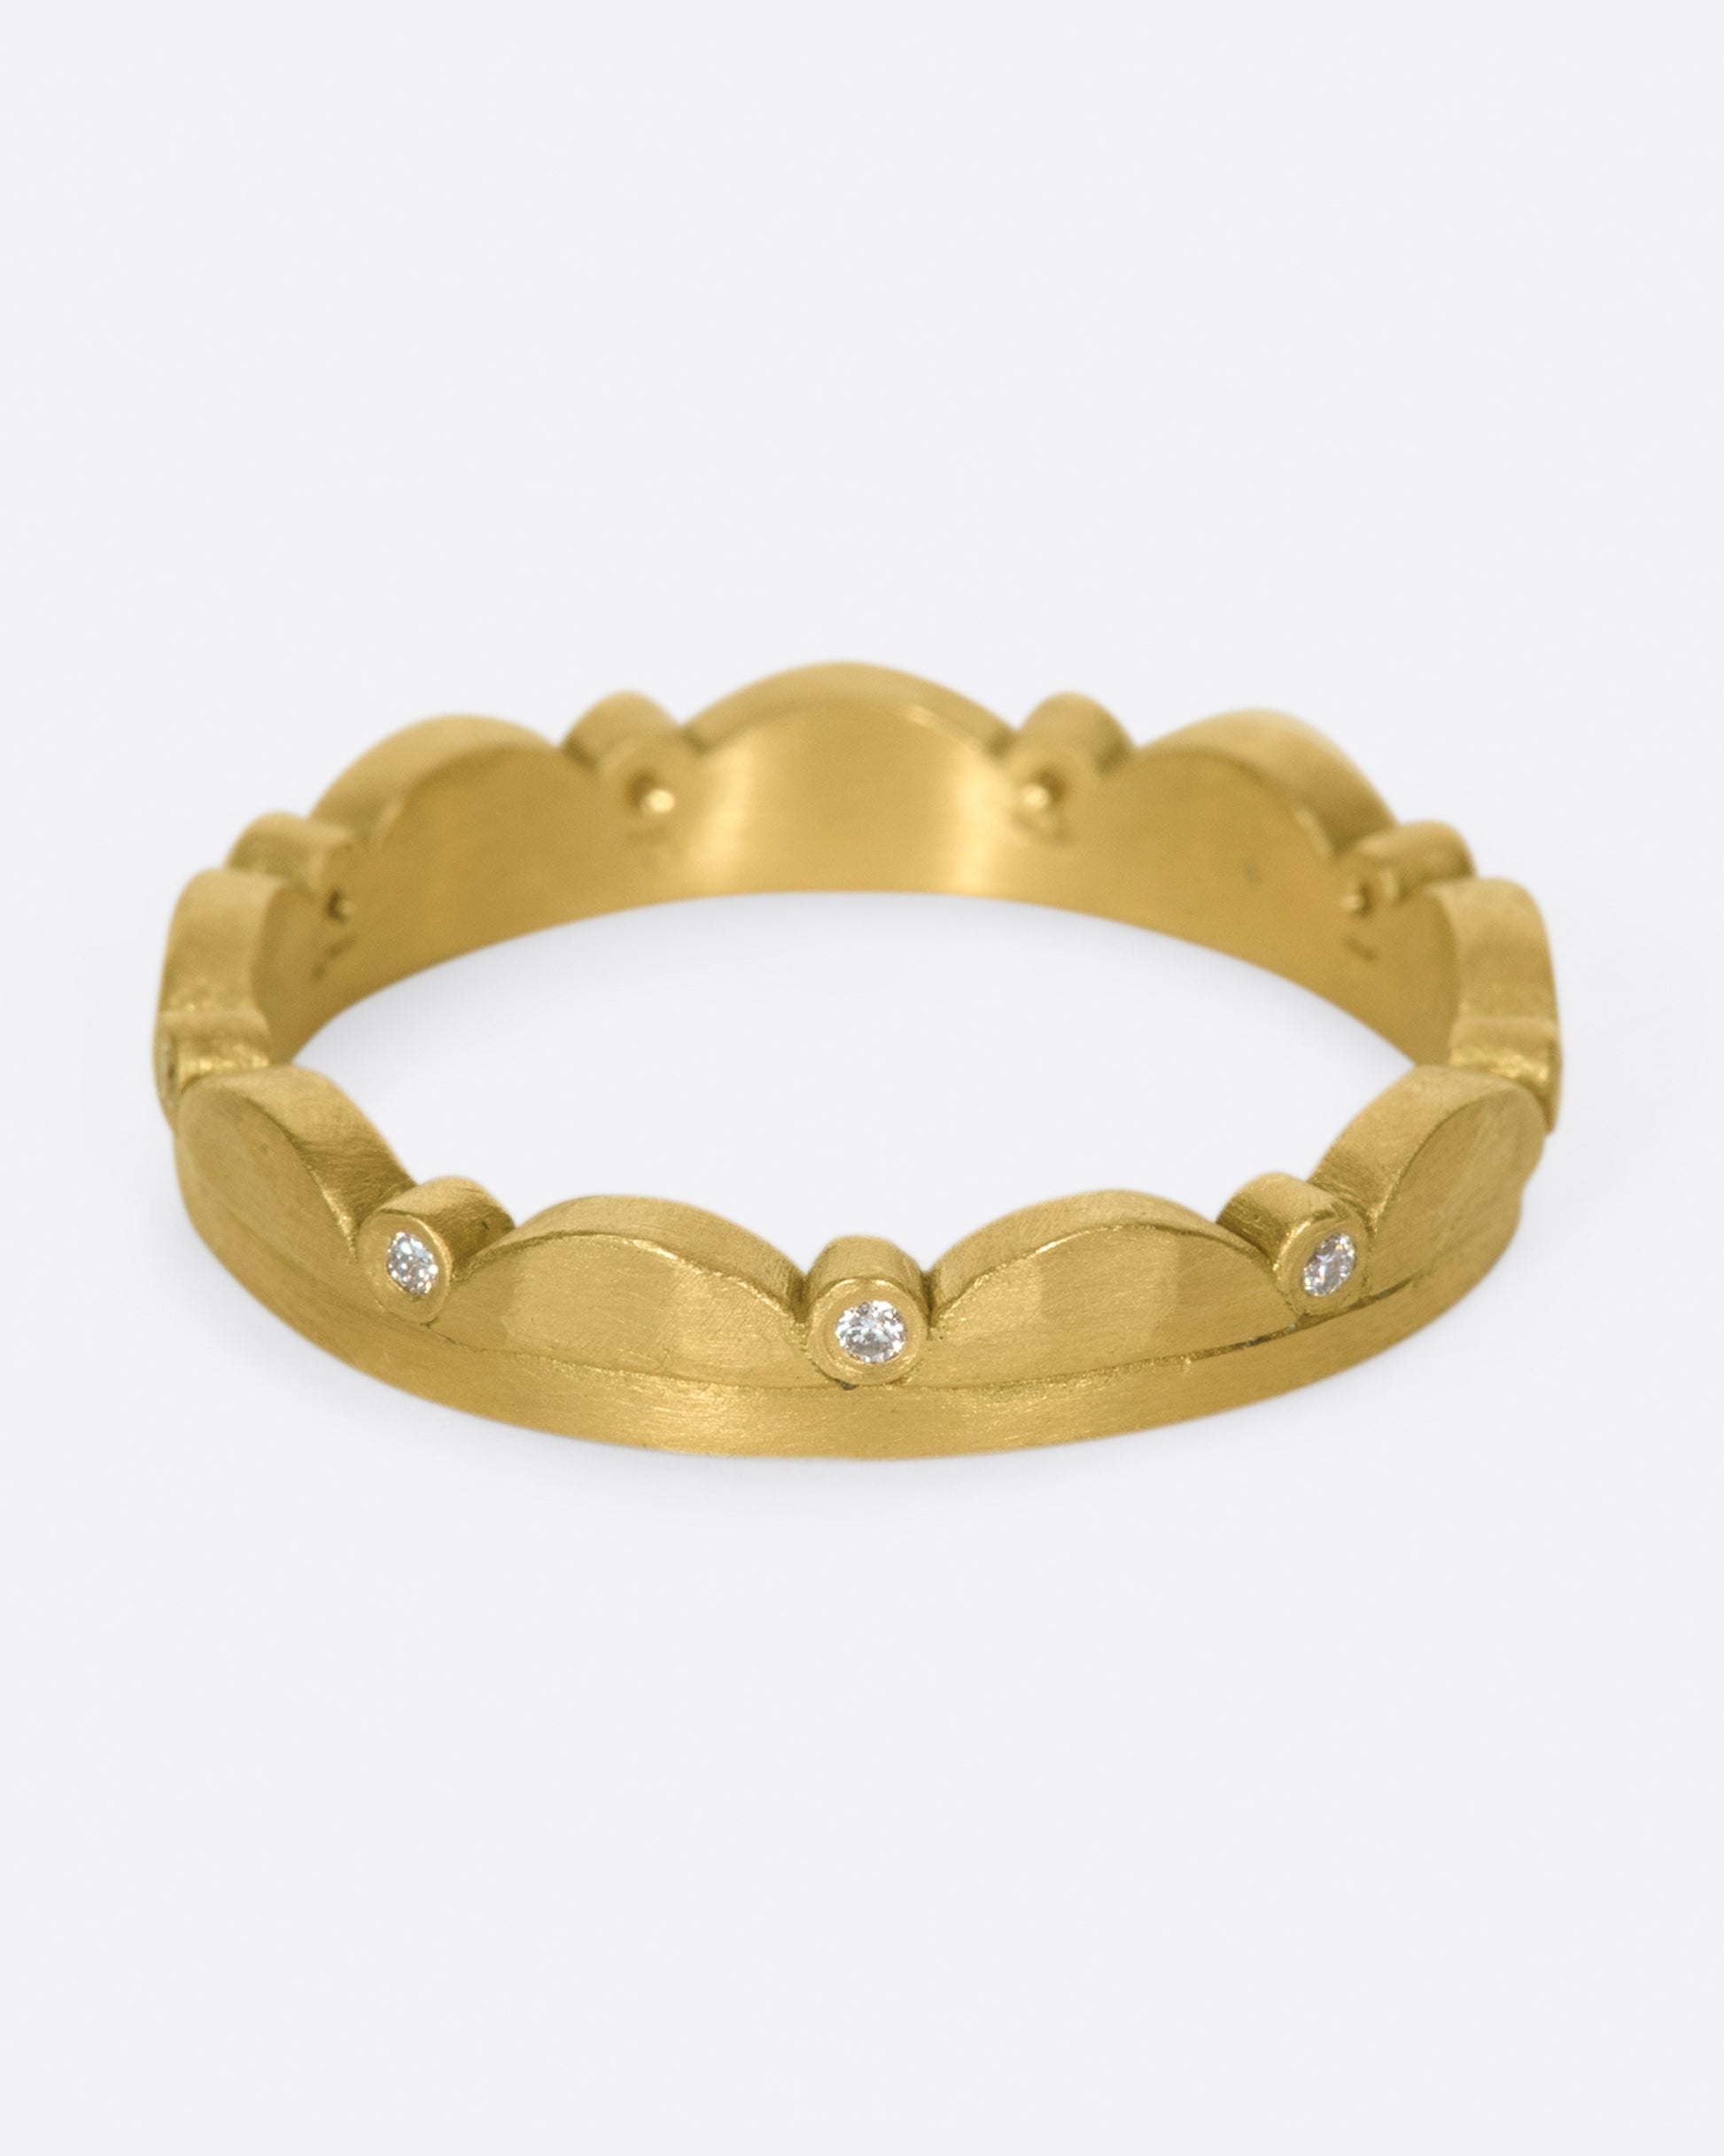 A delightful ring that's scalloped on one side, punctuated by sparkling inset diamonds.